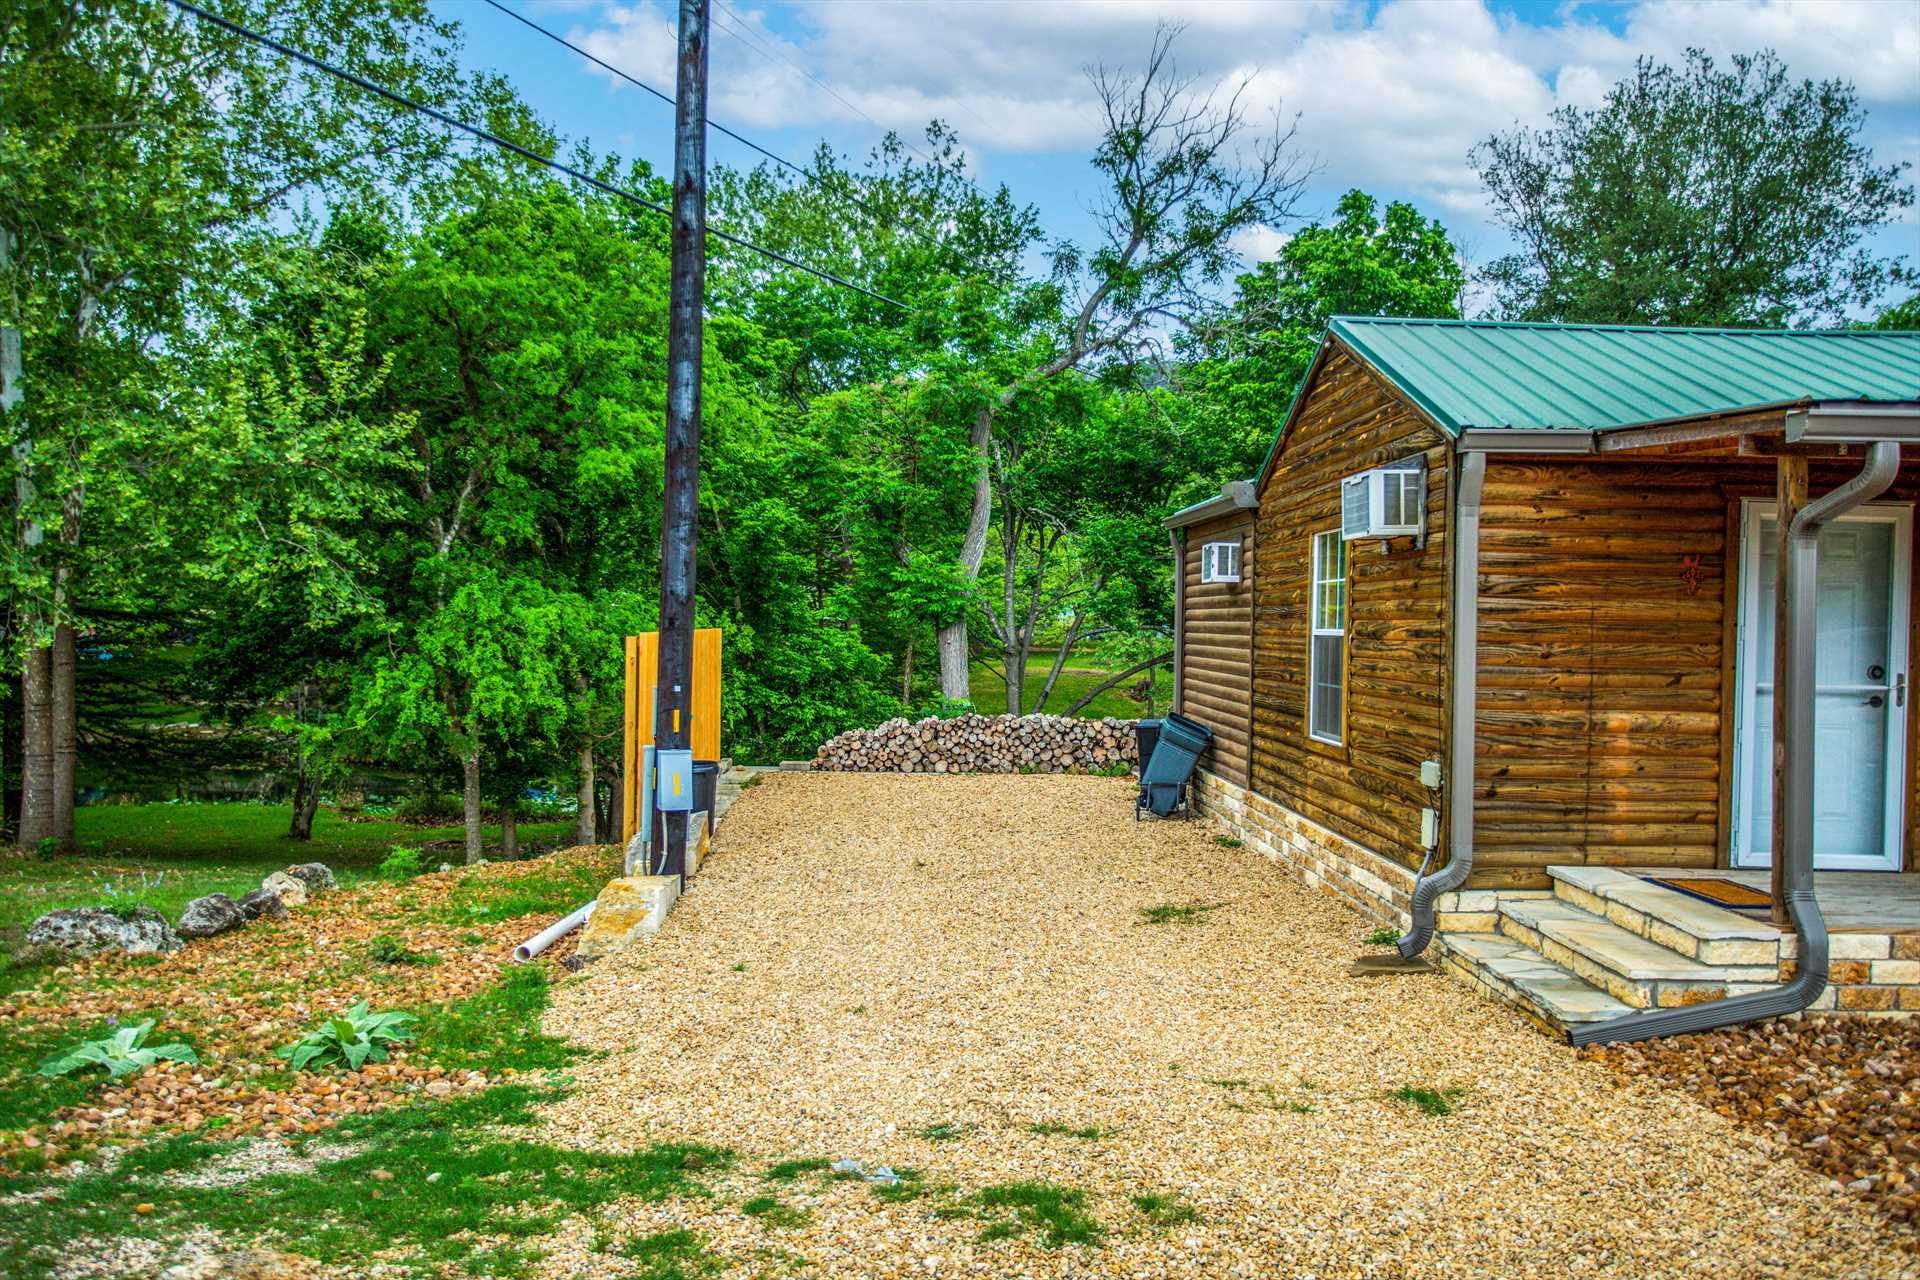                                                 The tree-line property here is the perfect complement to the amazing Hill Country views you'll see here!